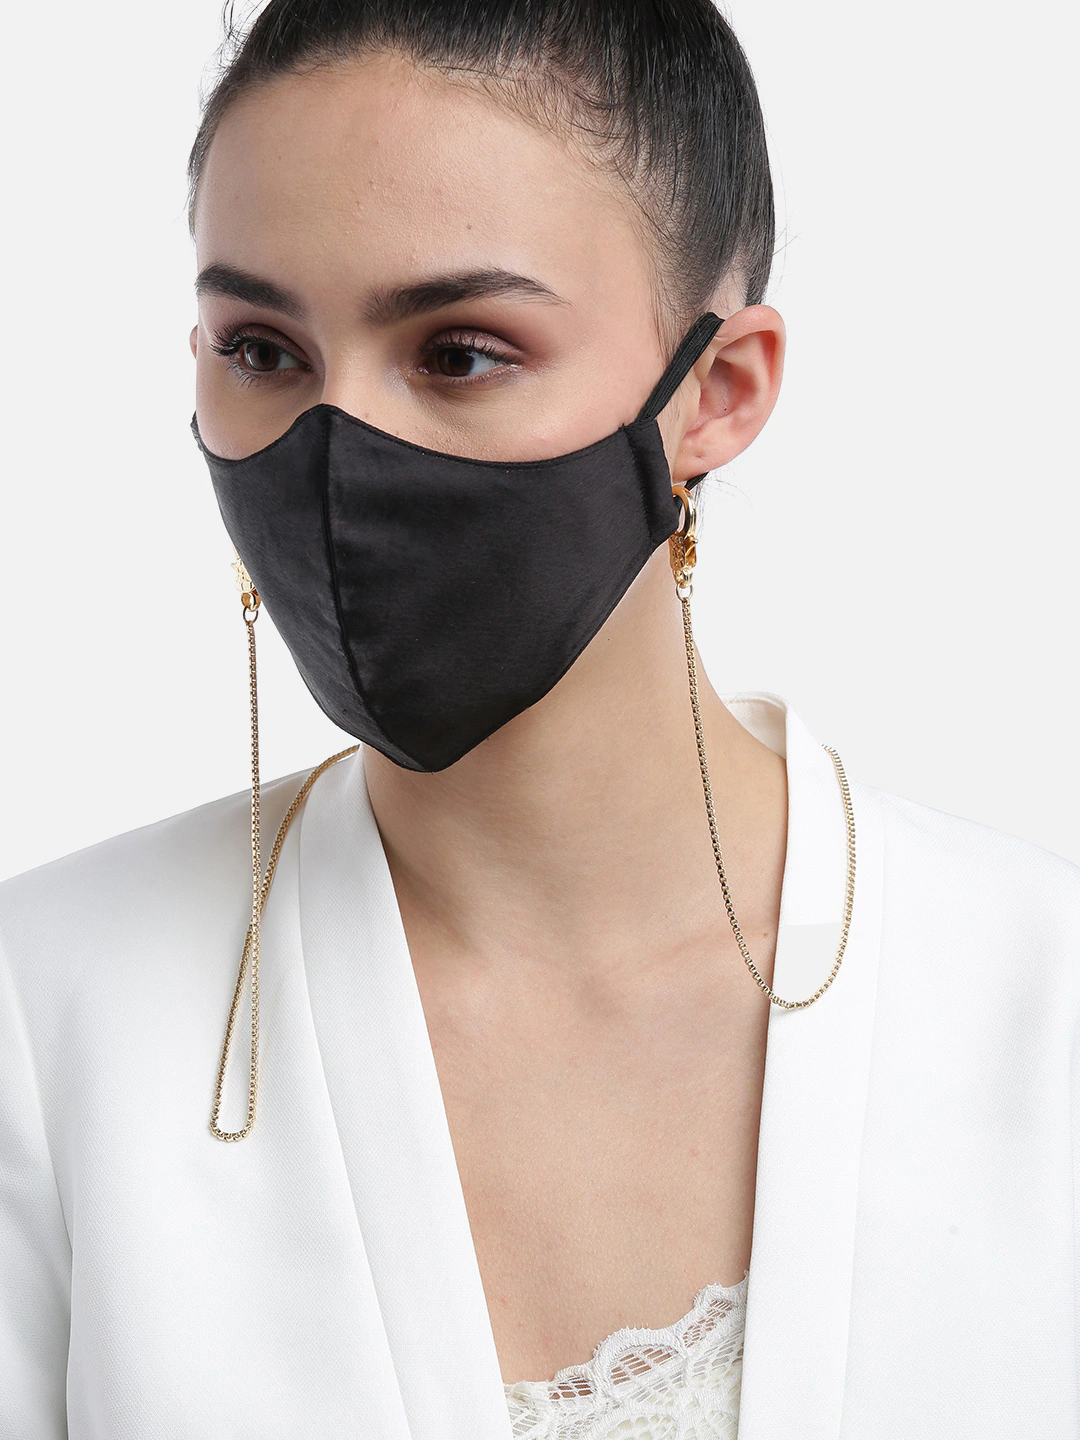 Blueberry solid black satin mask with Mask Holder Chain Strap